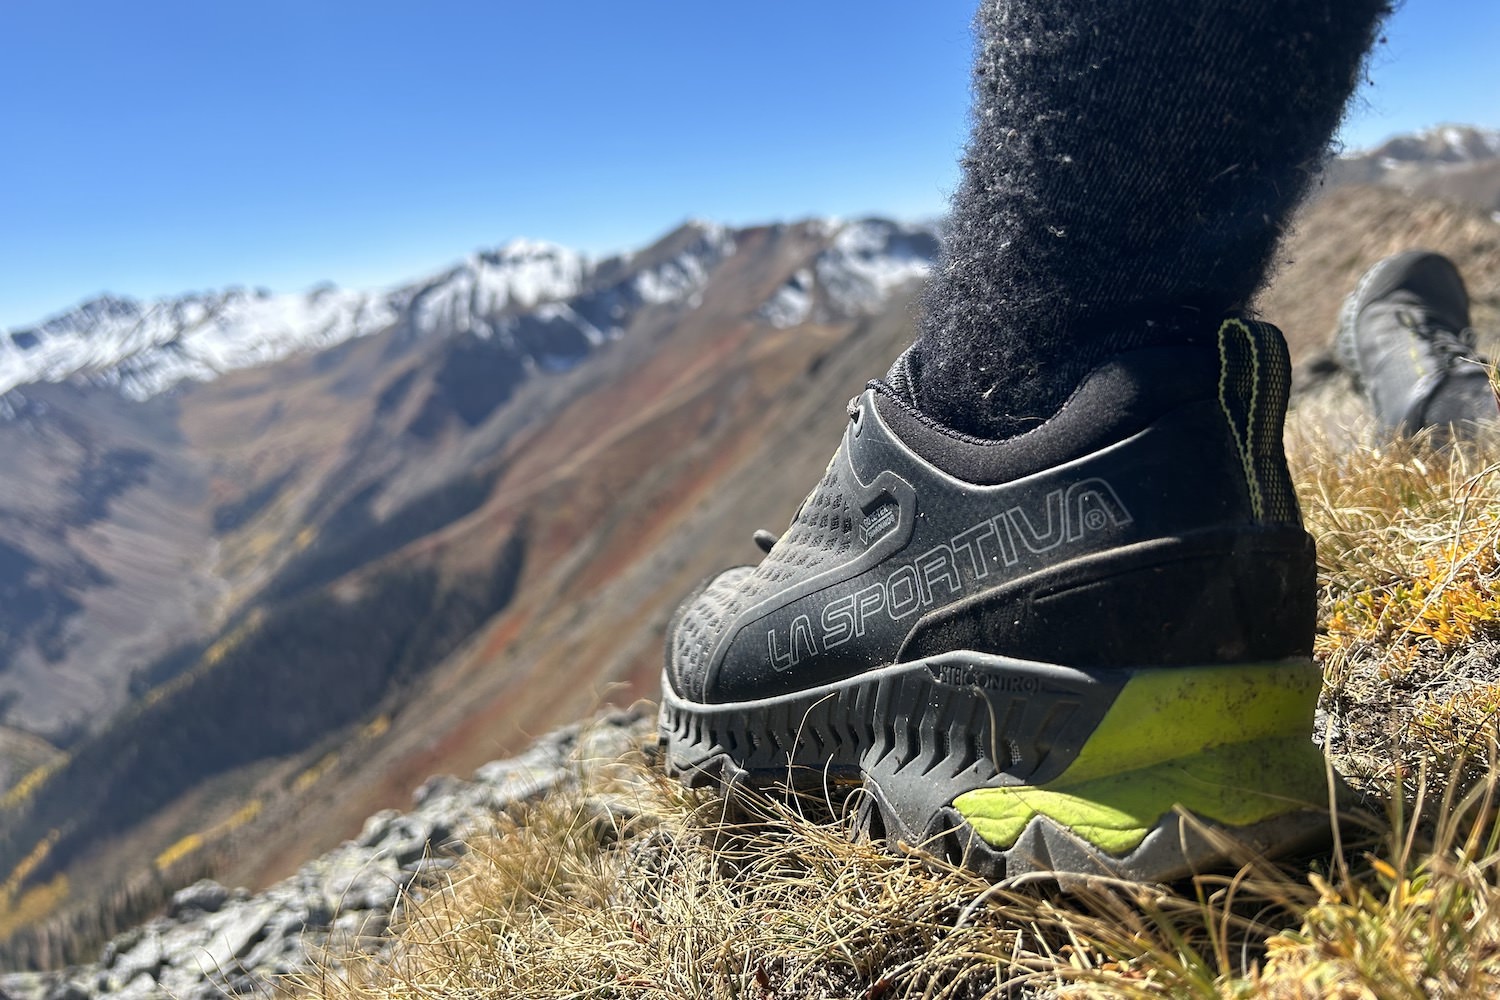 The La Sportiva Spire GTX men's hiking shoes in the foreground with a blurry view of snow-capped Colorado mountains in the distance